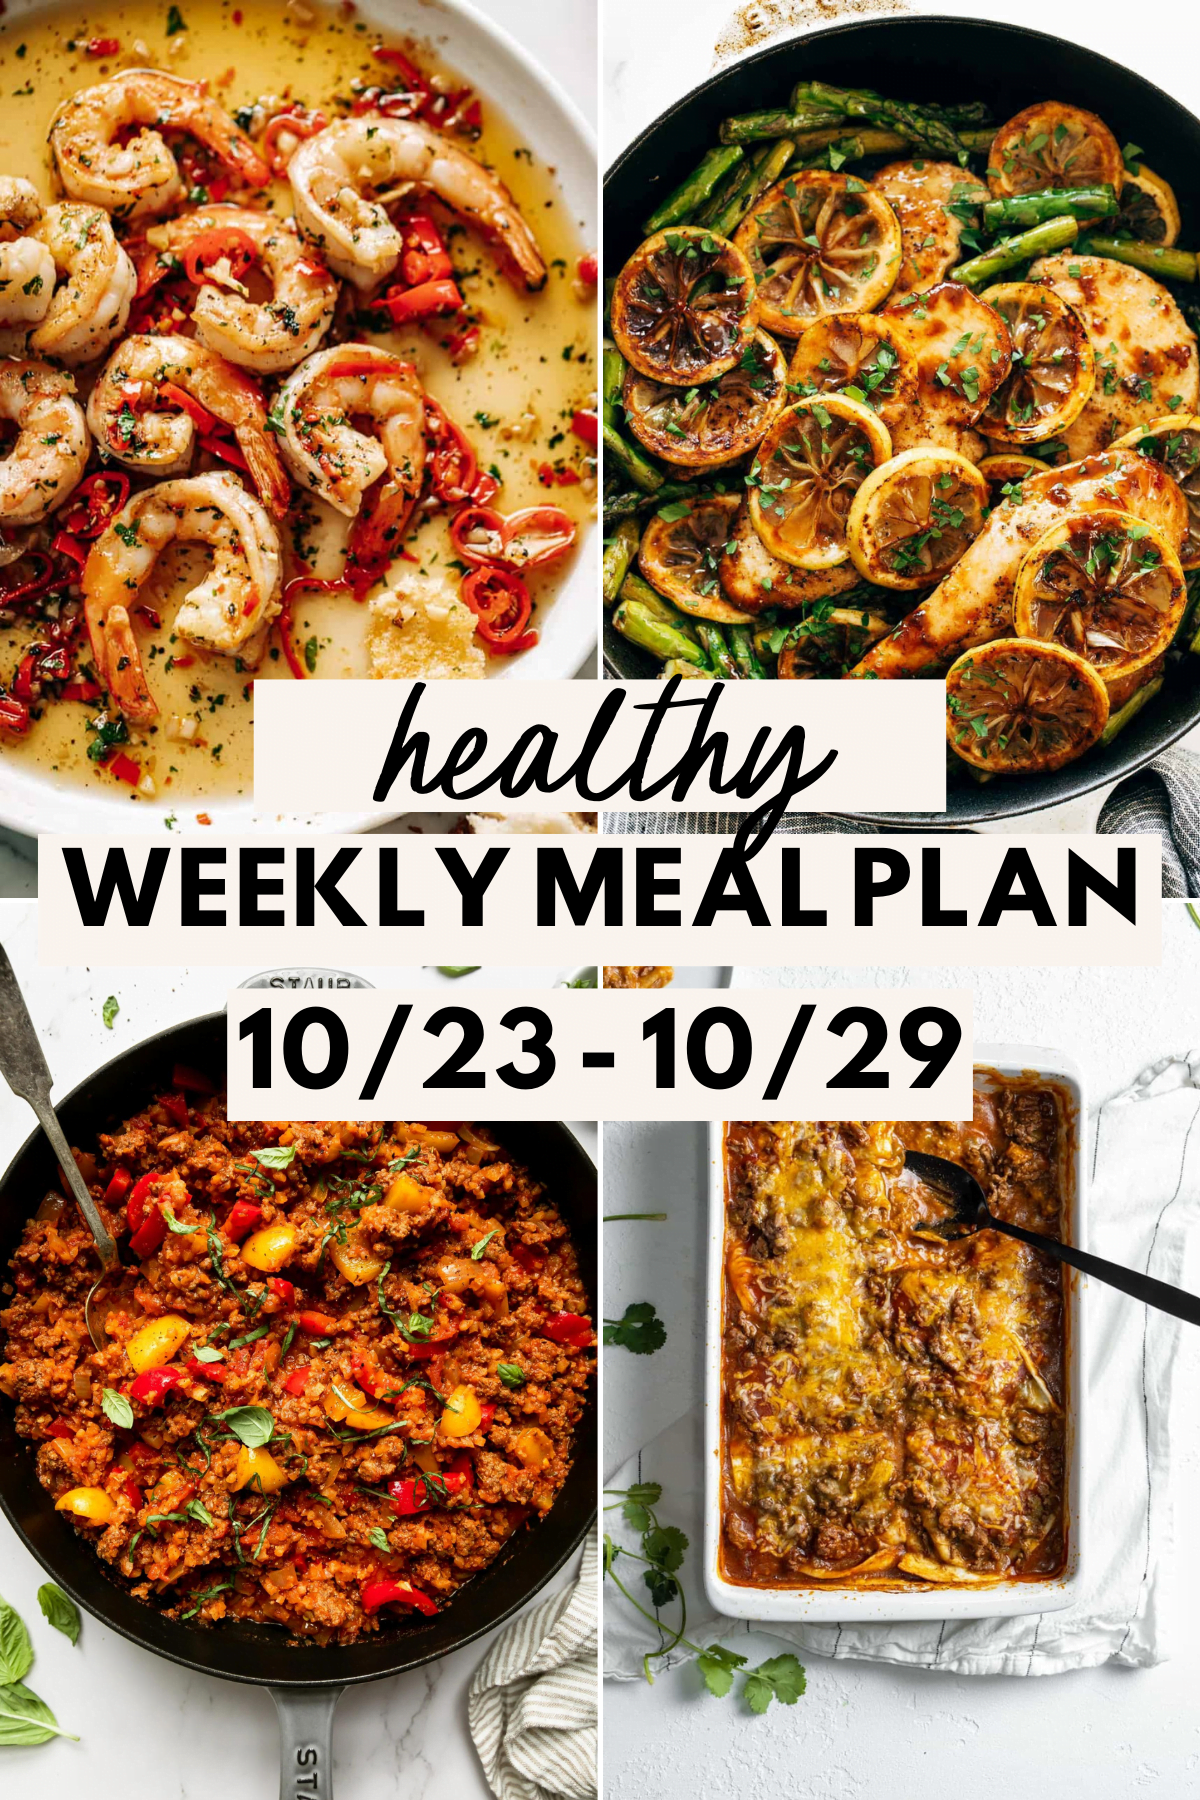 collage image of 4 healthy meals with text for Pinterest for the healthy weekly meal plan for October 23-29